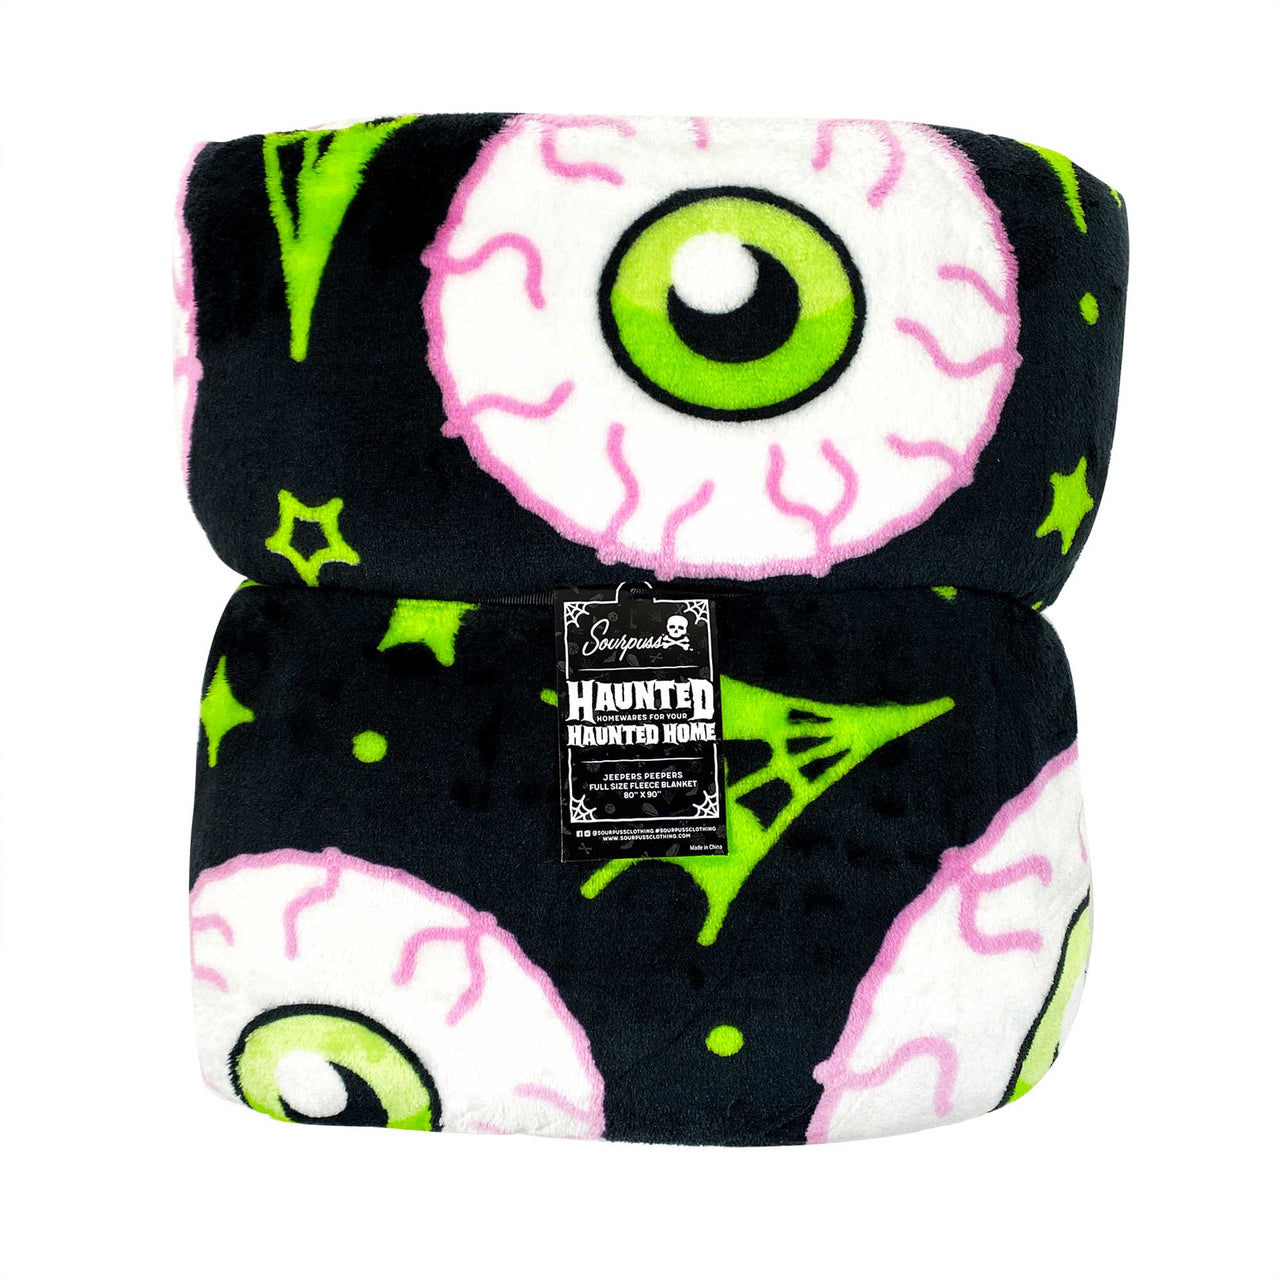 SOURPUSS JEEPERS PEEPERS FULL SIZE BLANKET